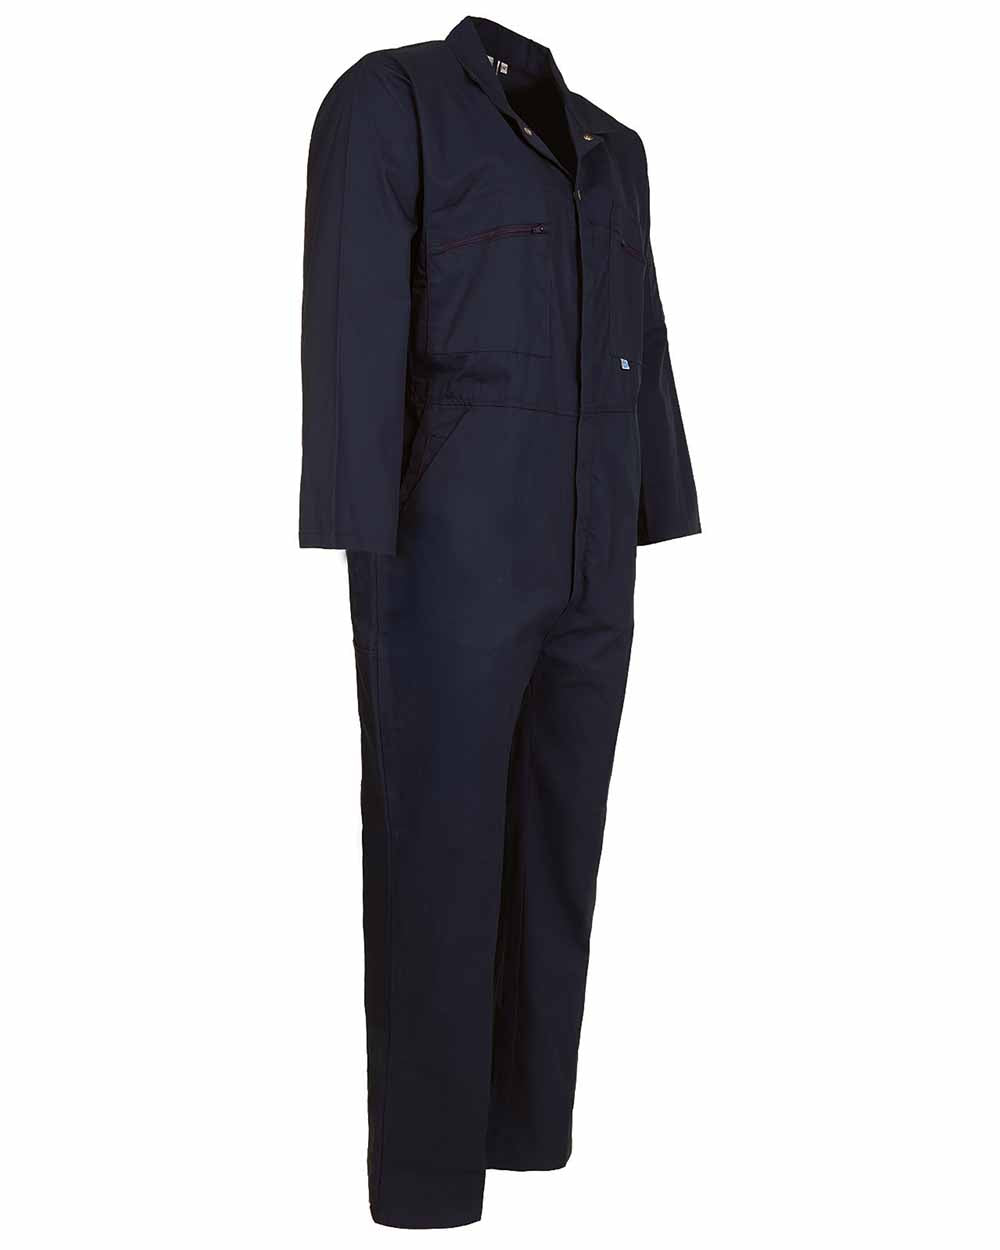 Chest pockets with zips on Fort Zip Front Boilersuit in Navy Blue 